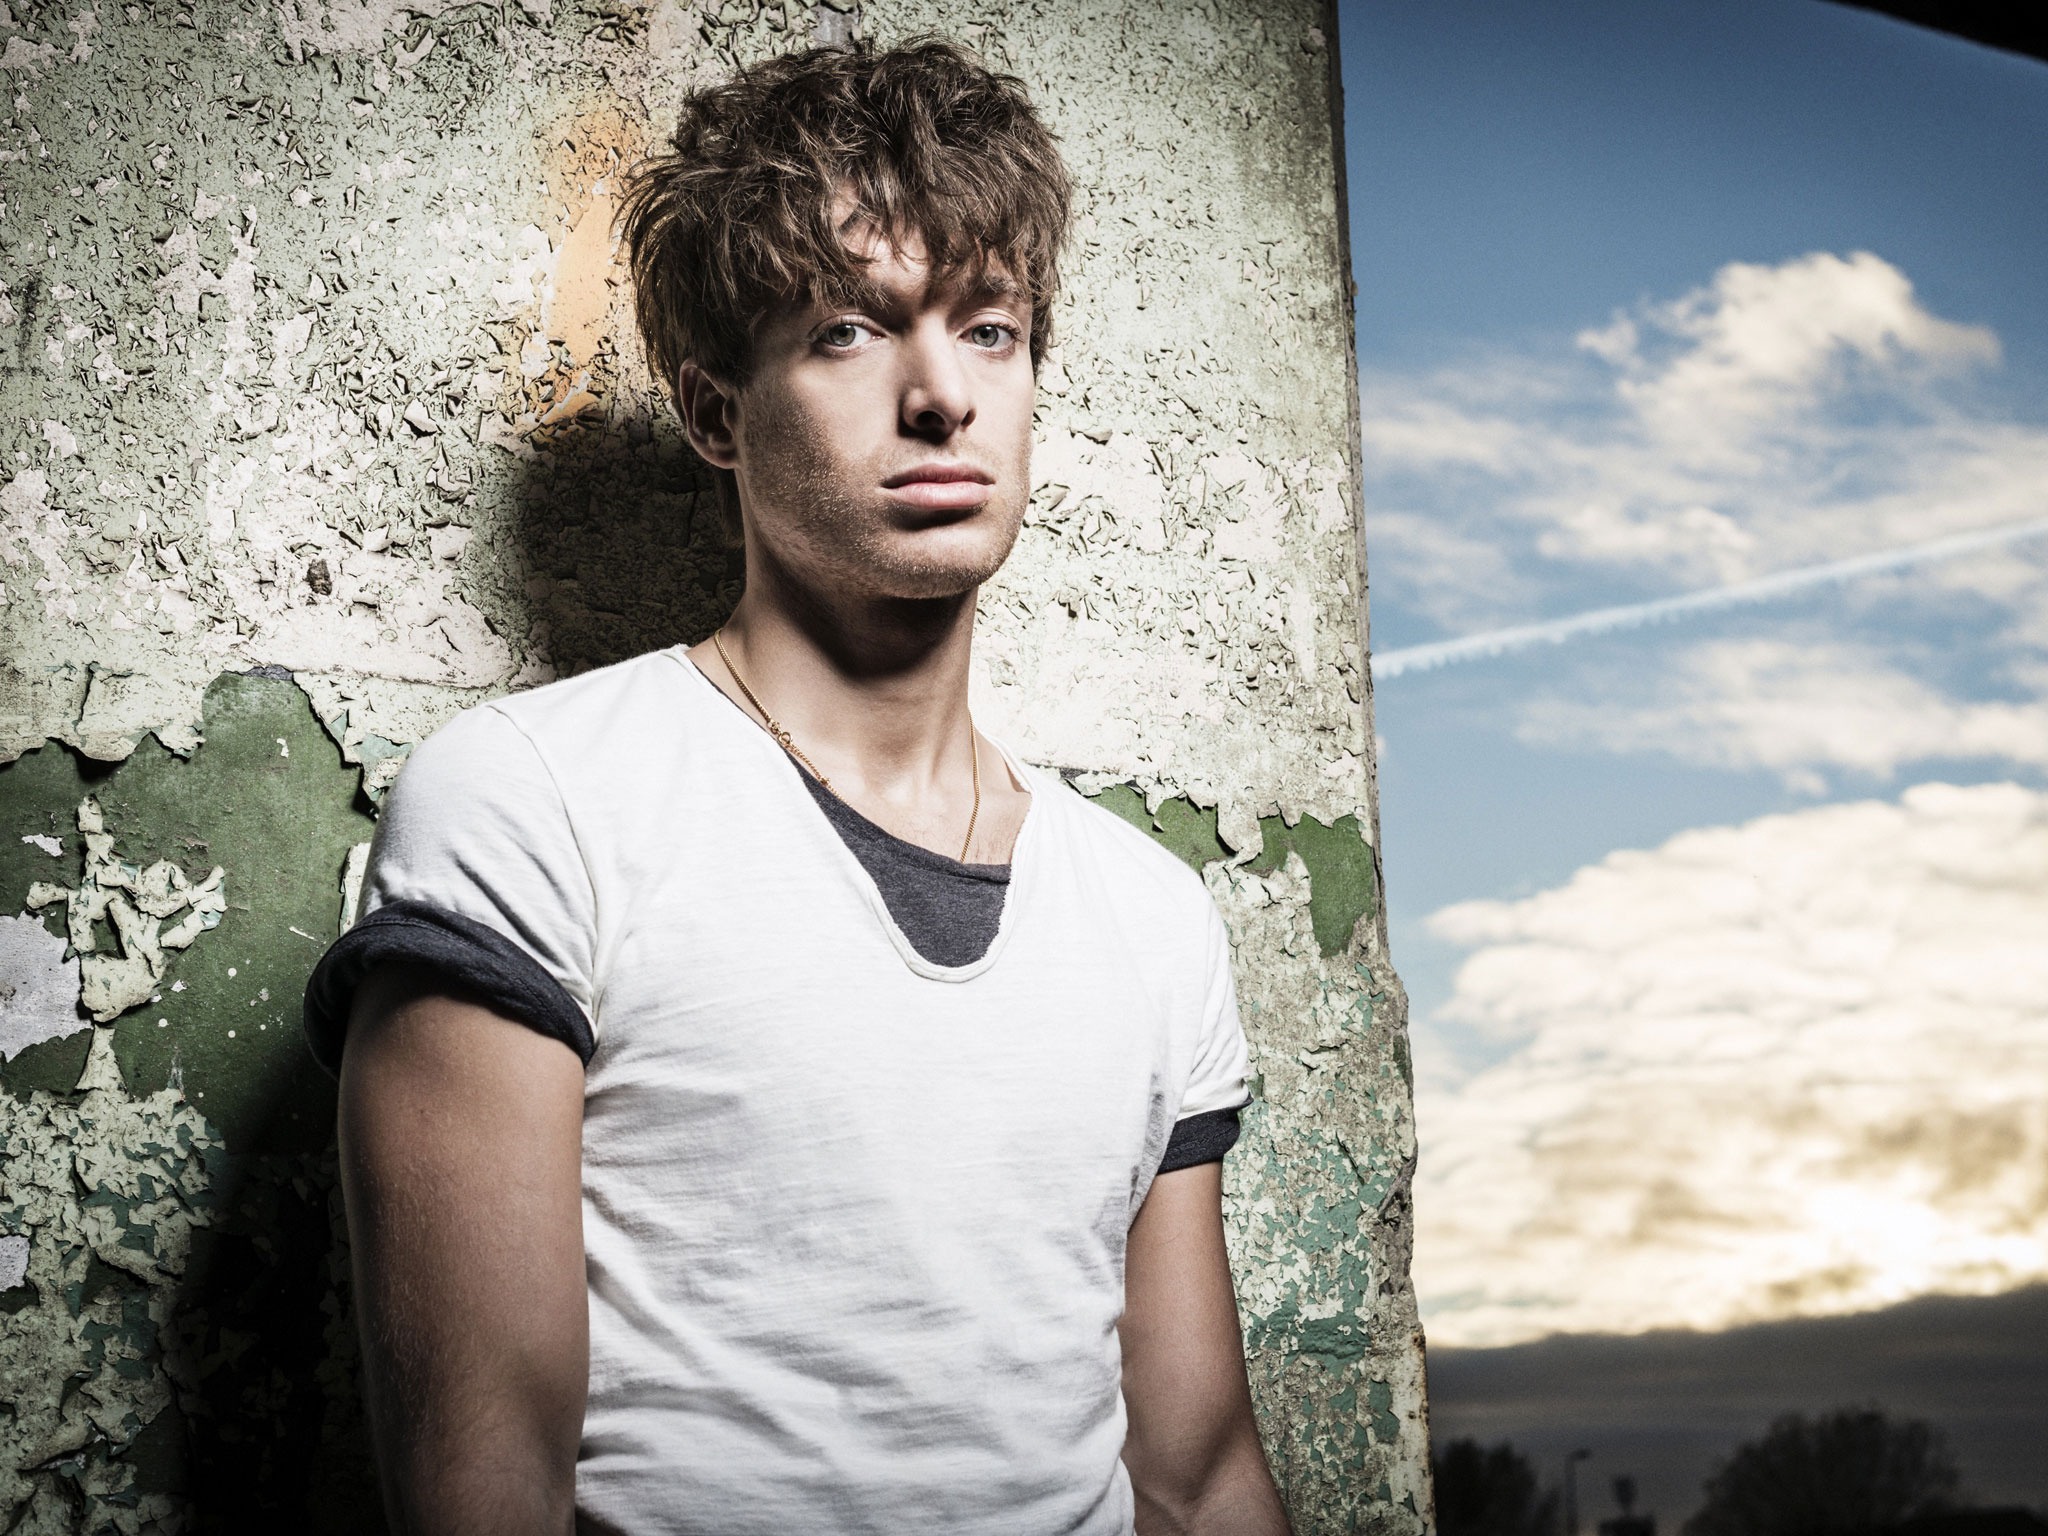 Paolo Nutini wallpapers, Music, HQ Paolo Nutini pictures | 4K Wallpapers 2019 2050x1540